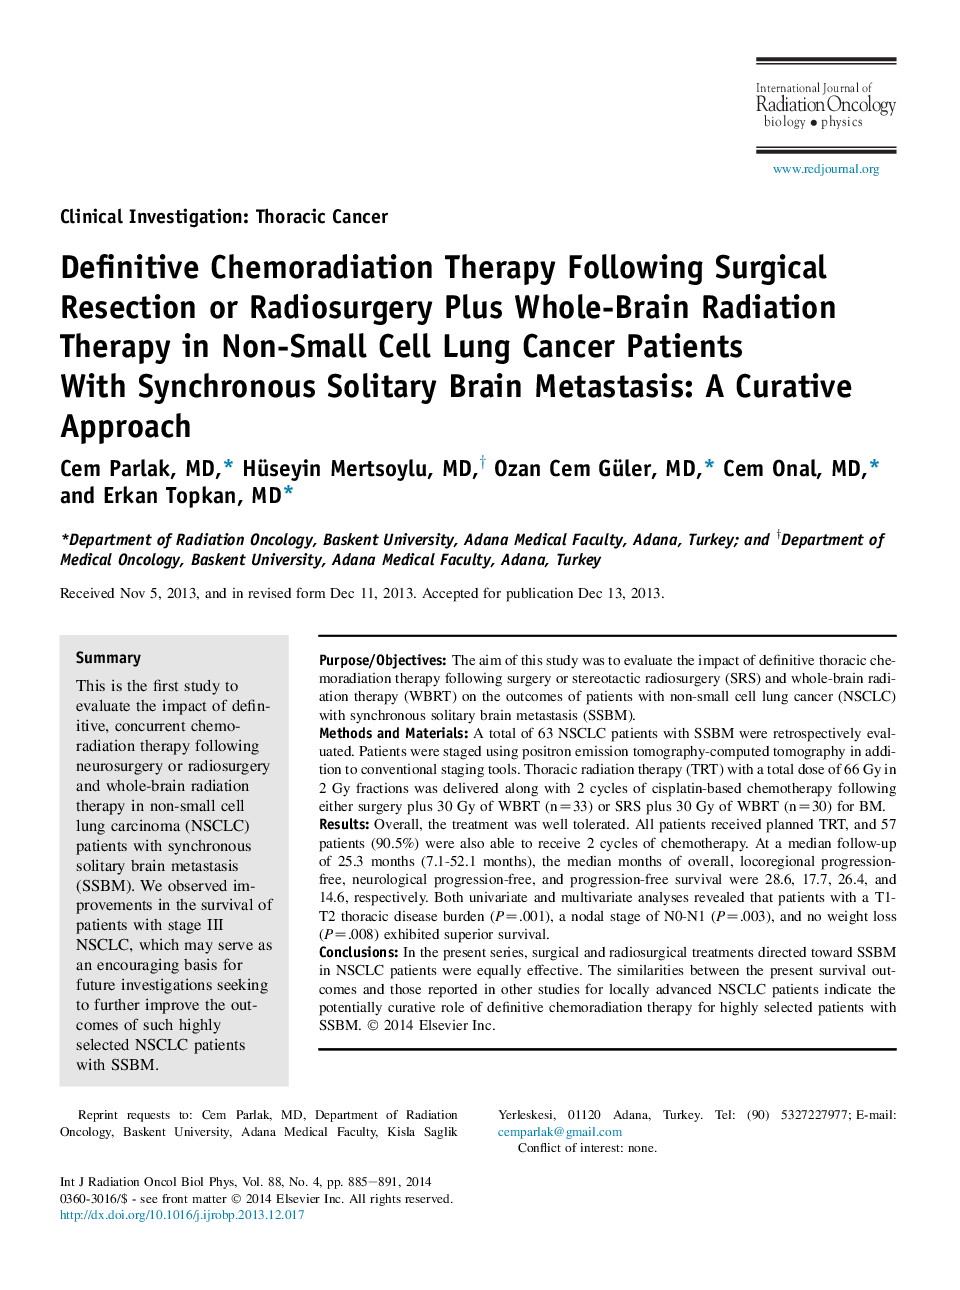 Definitive Chemoradiation Therapy Following Surgical Resection or Radiosurgery Plus Whole-Brain Radiation Therapy in Non-Small Cell Lung Cancer Patients With Synchronous Solitary Brain Metastasis: A Curative Approach